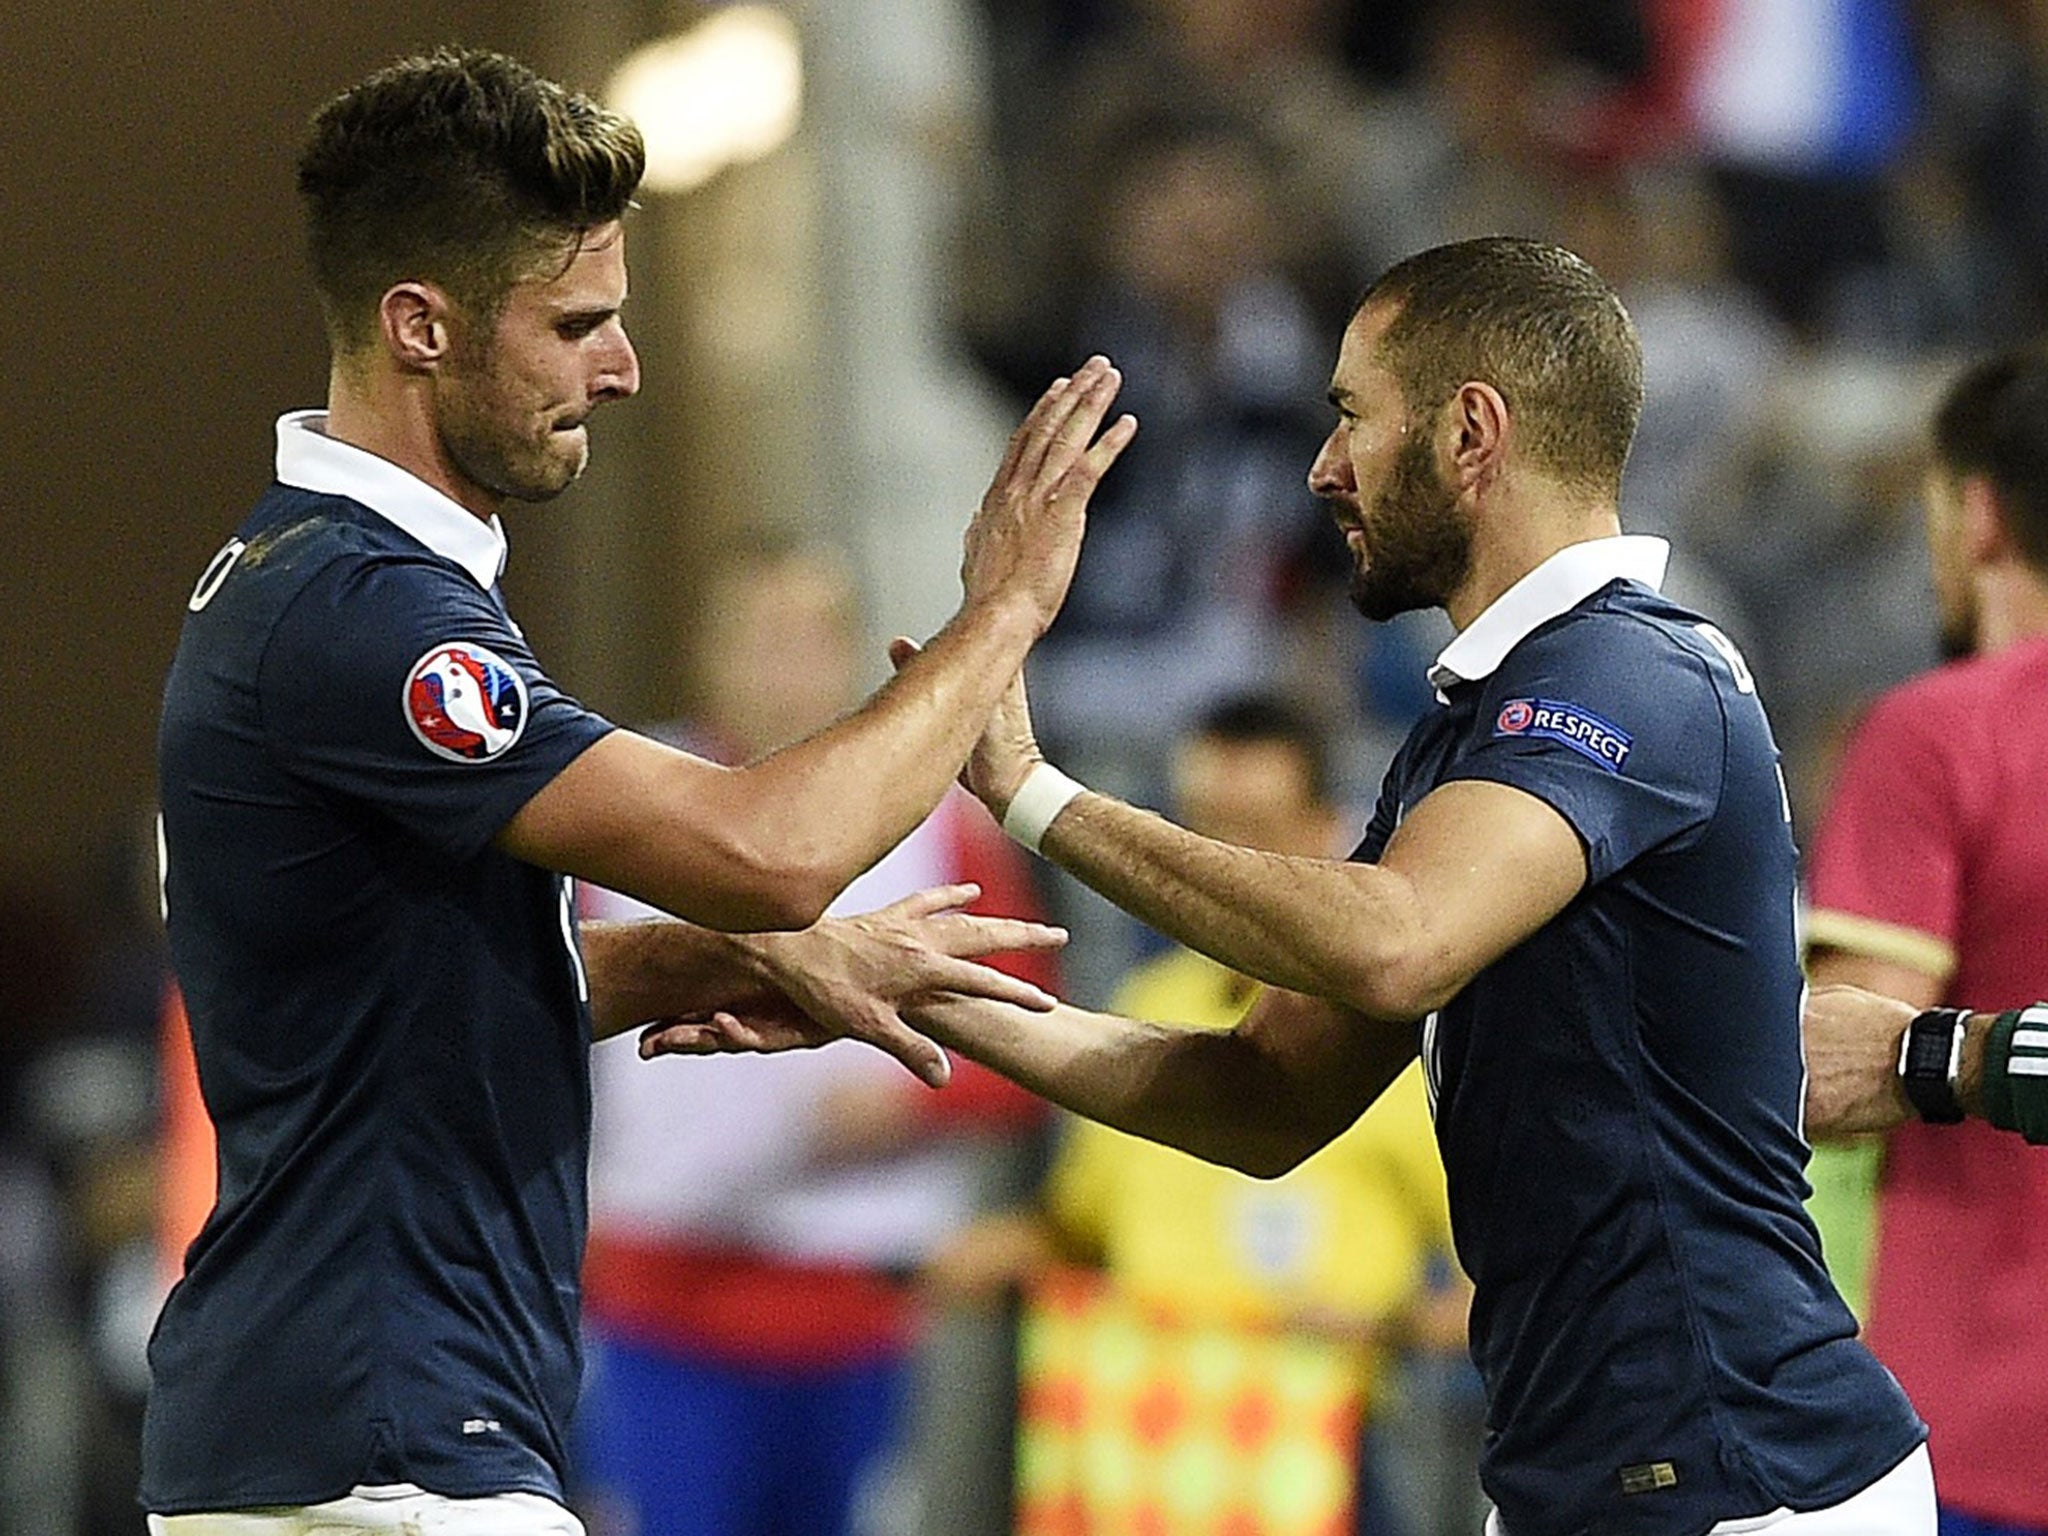 Olivier Giroud is replaced by Karim Benzema for France